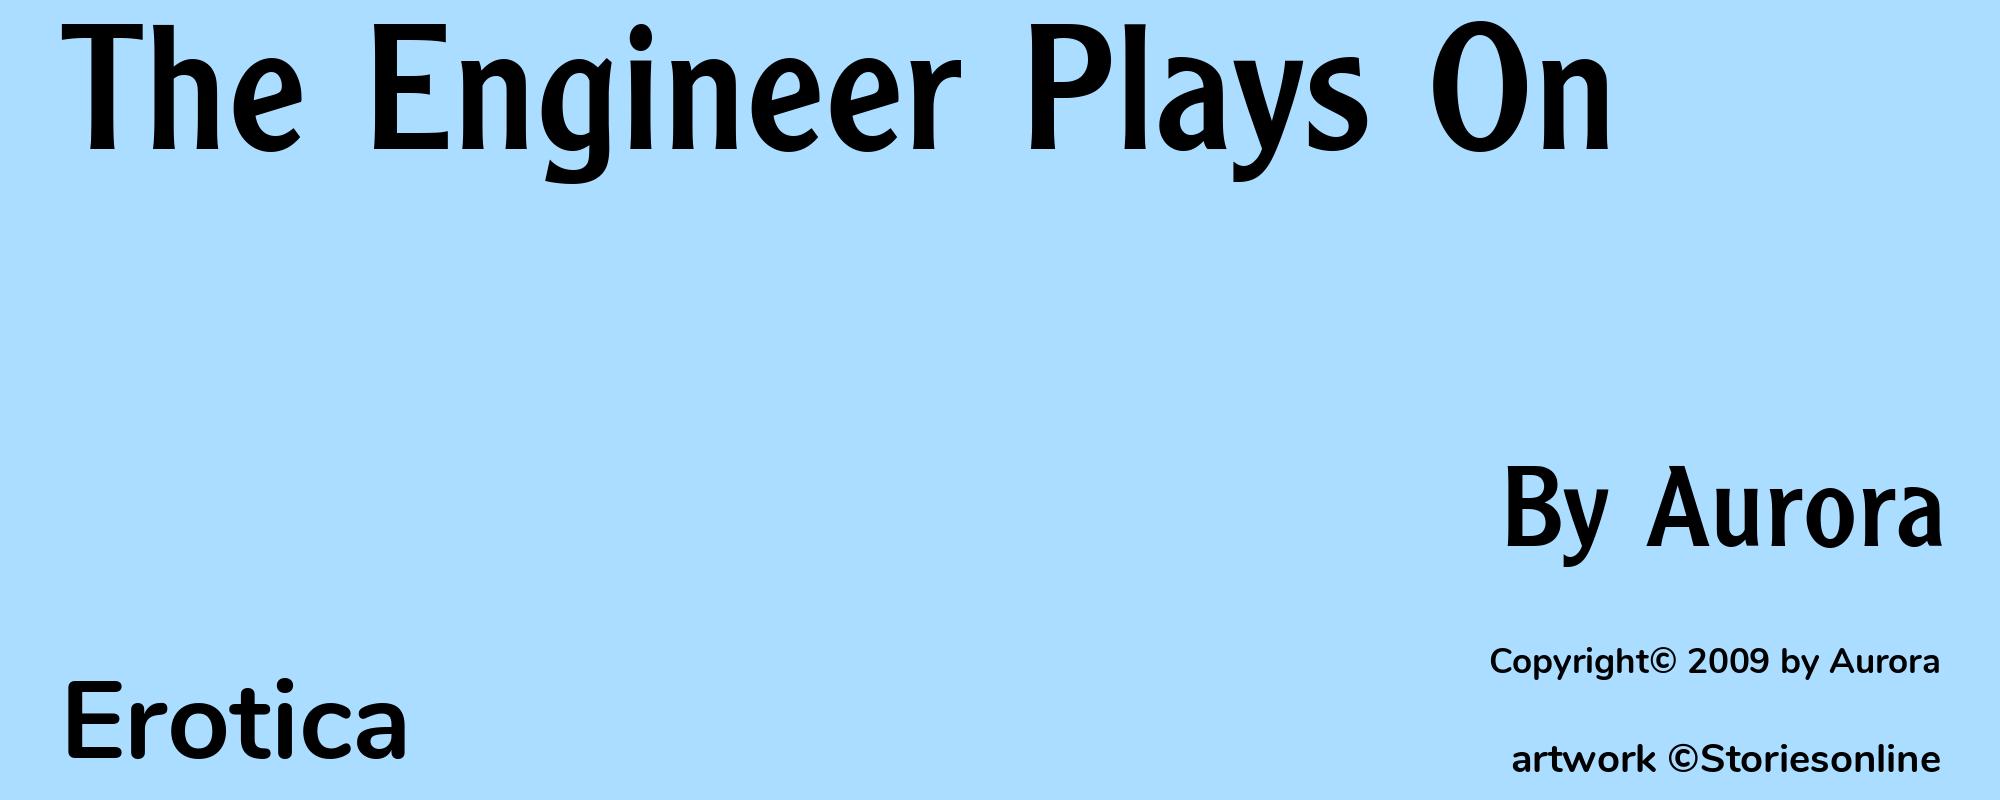 The Engineer Plays On - Cover